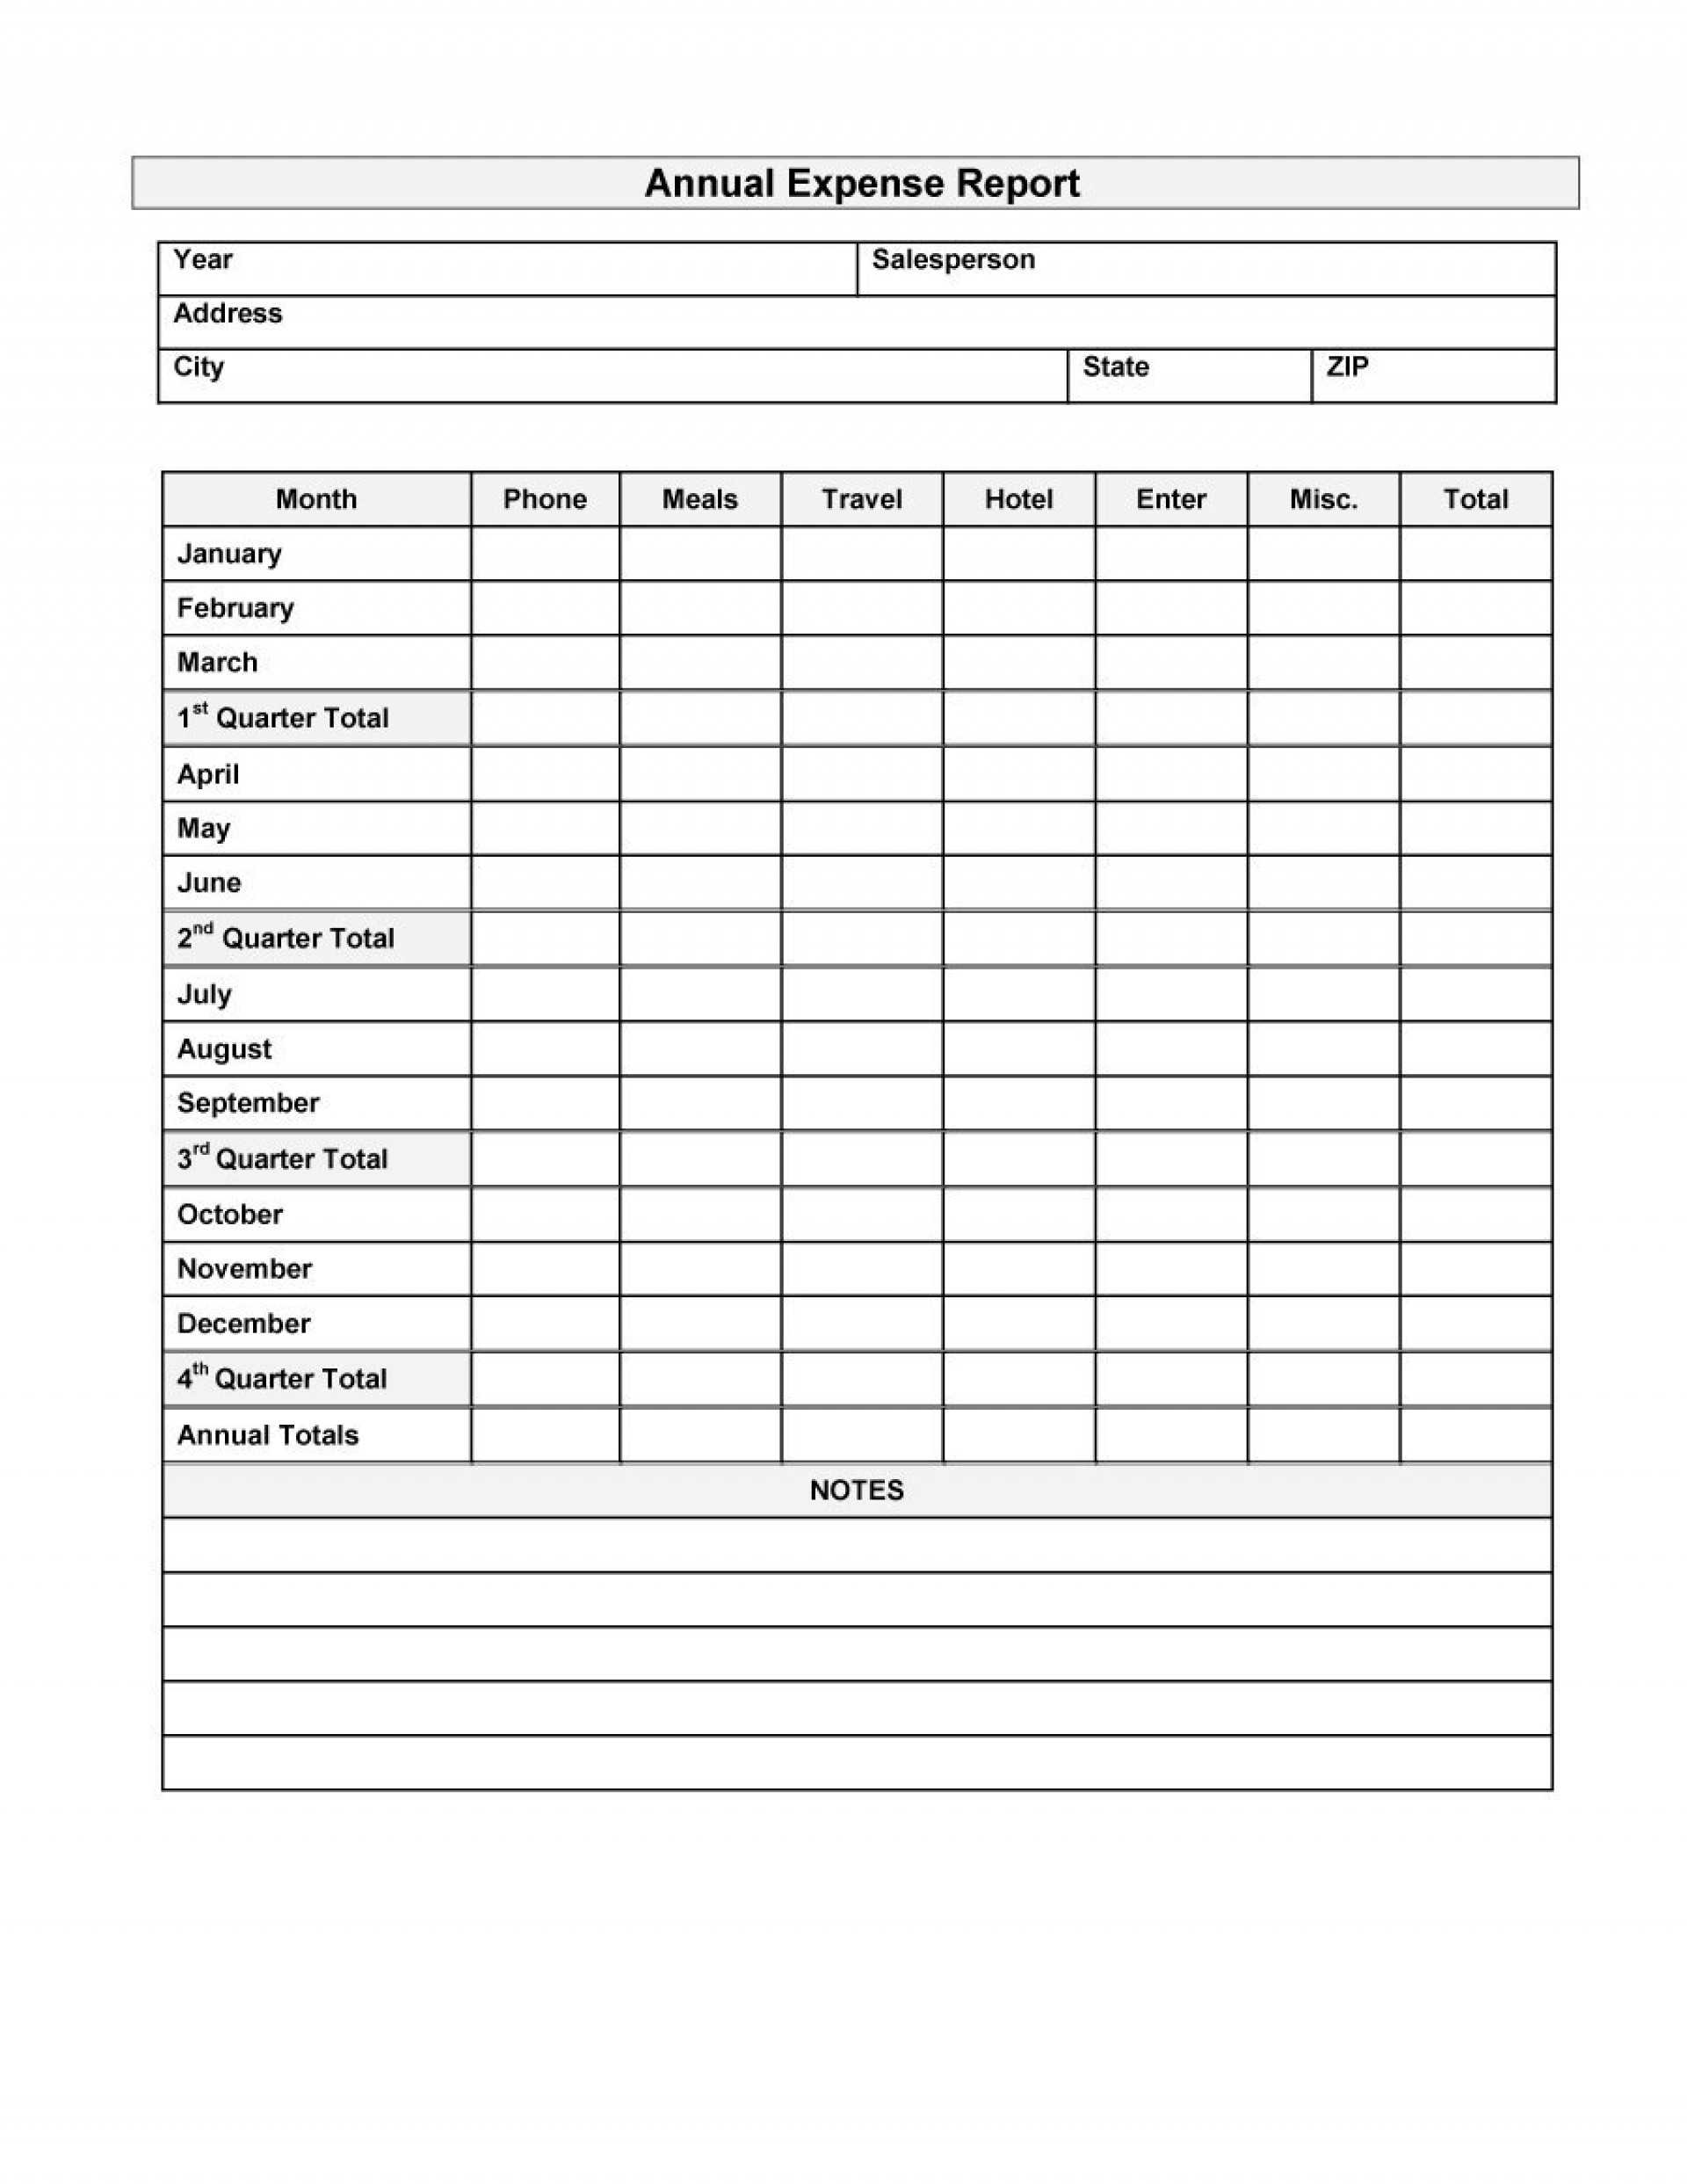 025 Expenses Report Template Excel Expense Magnificent Ideas Intended For Quarterly Report Template Small Business